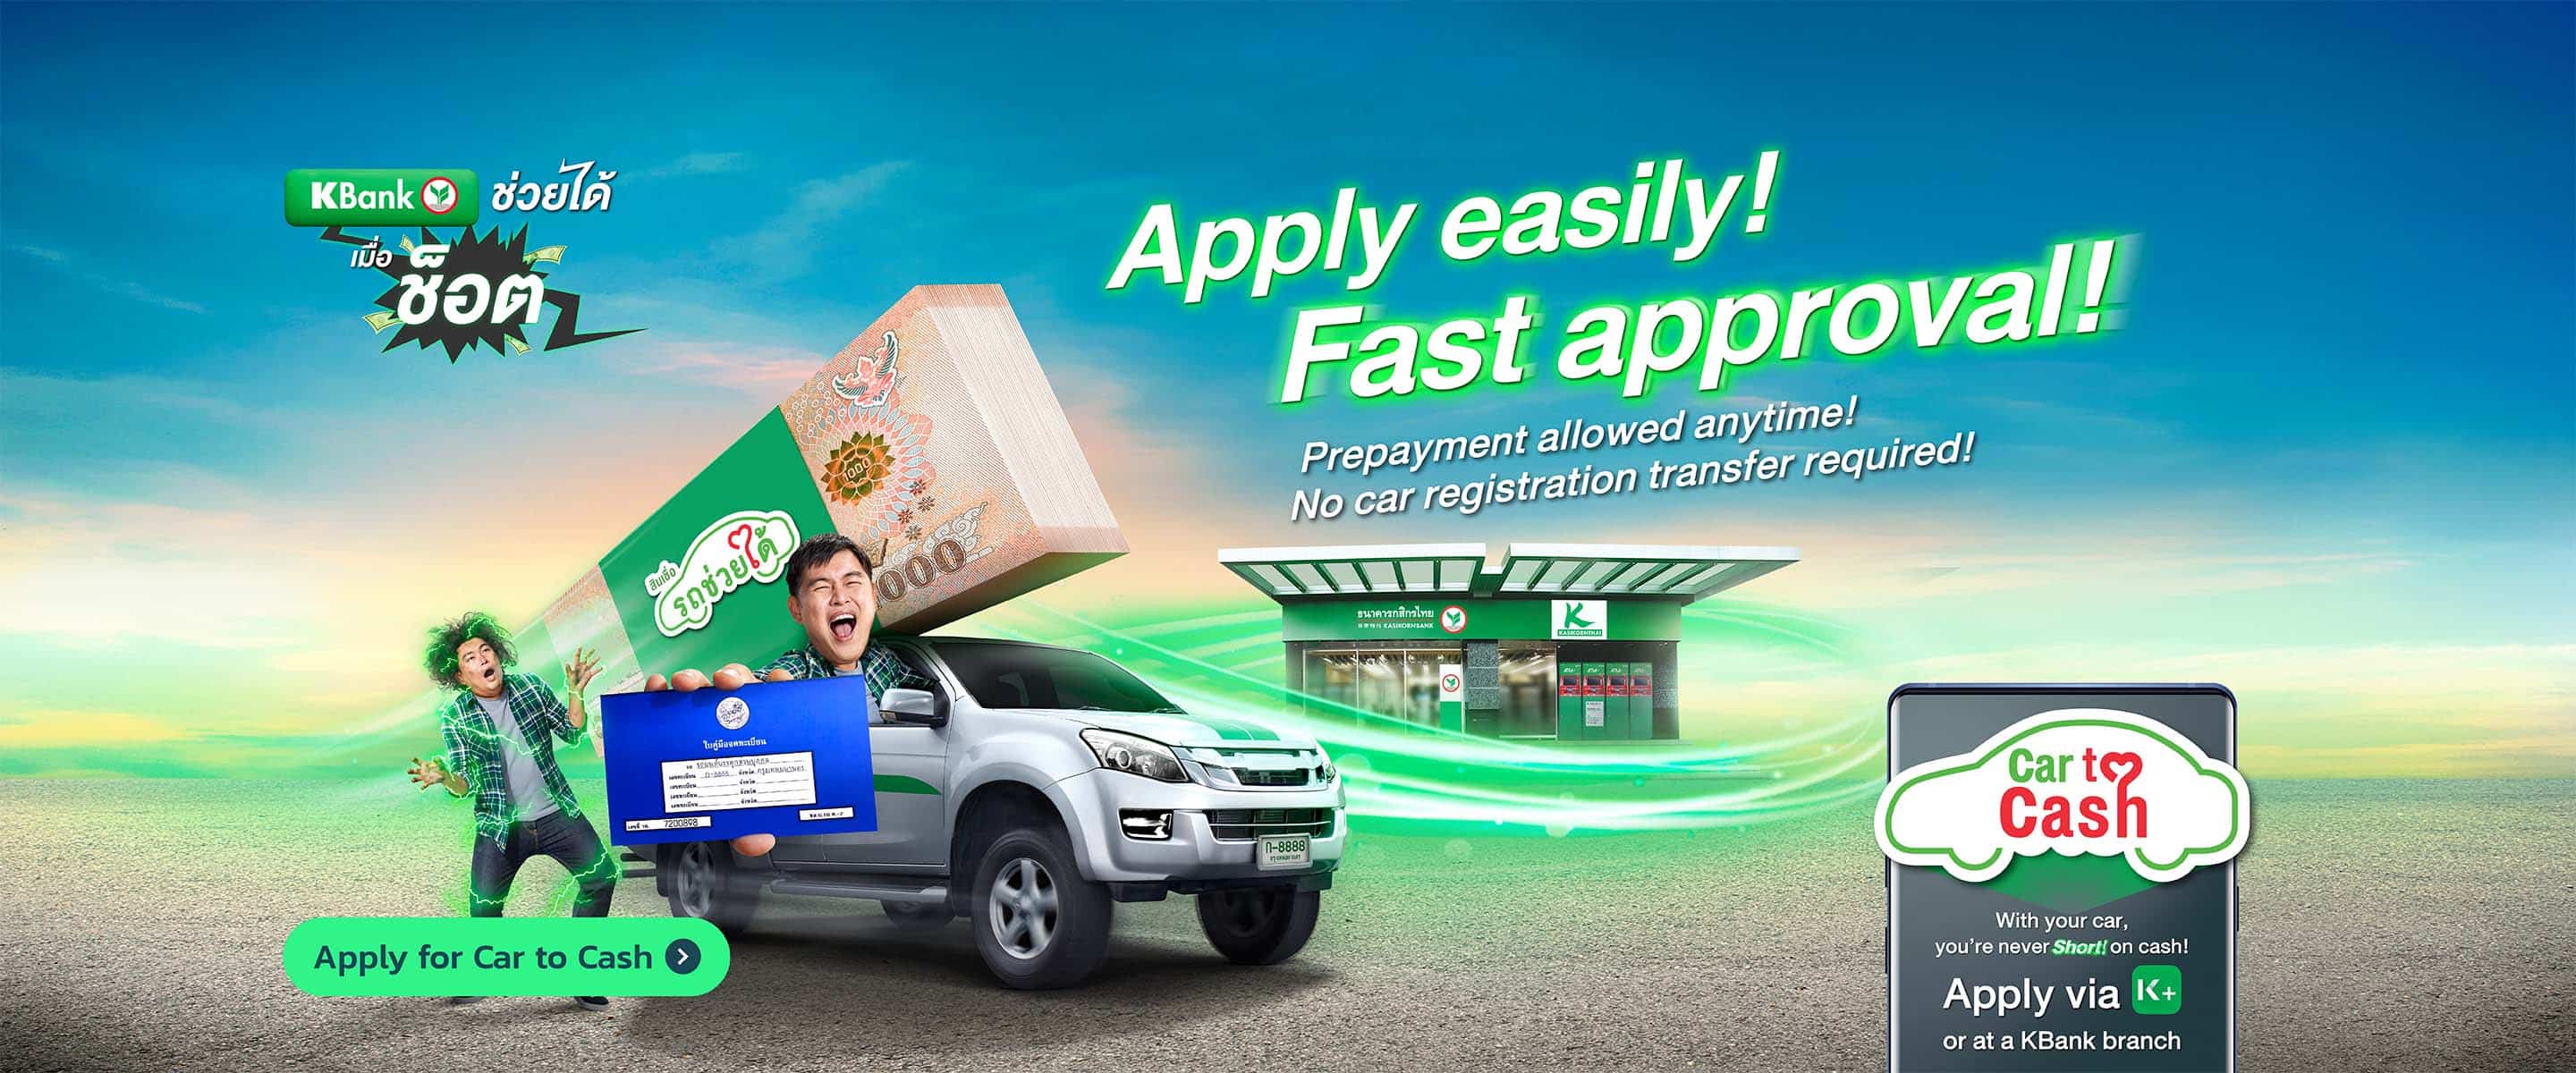 Apply easily! Fast approval!